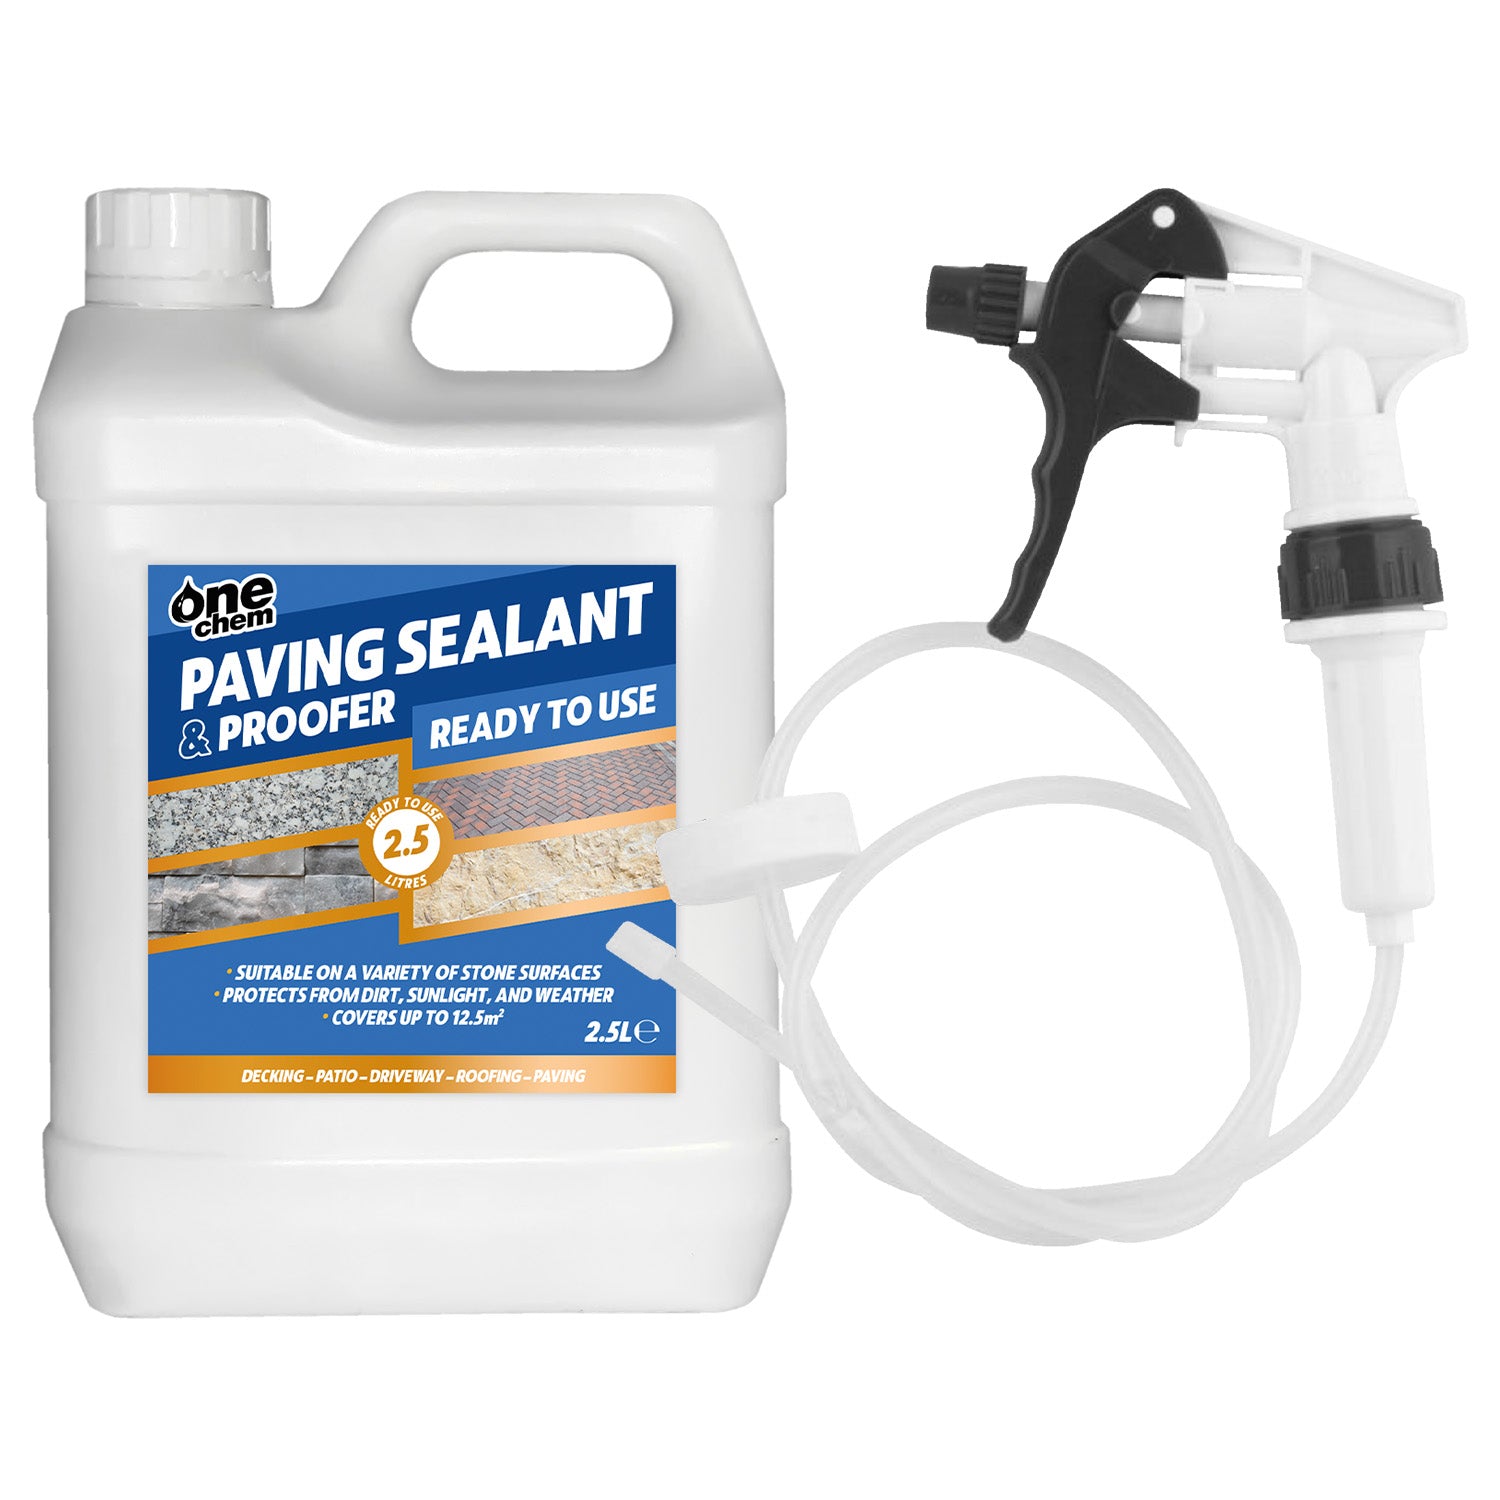 One Chem - Paving Sealant and Proofer 2.5 Litre Water Seal with Long Hose Trigger